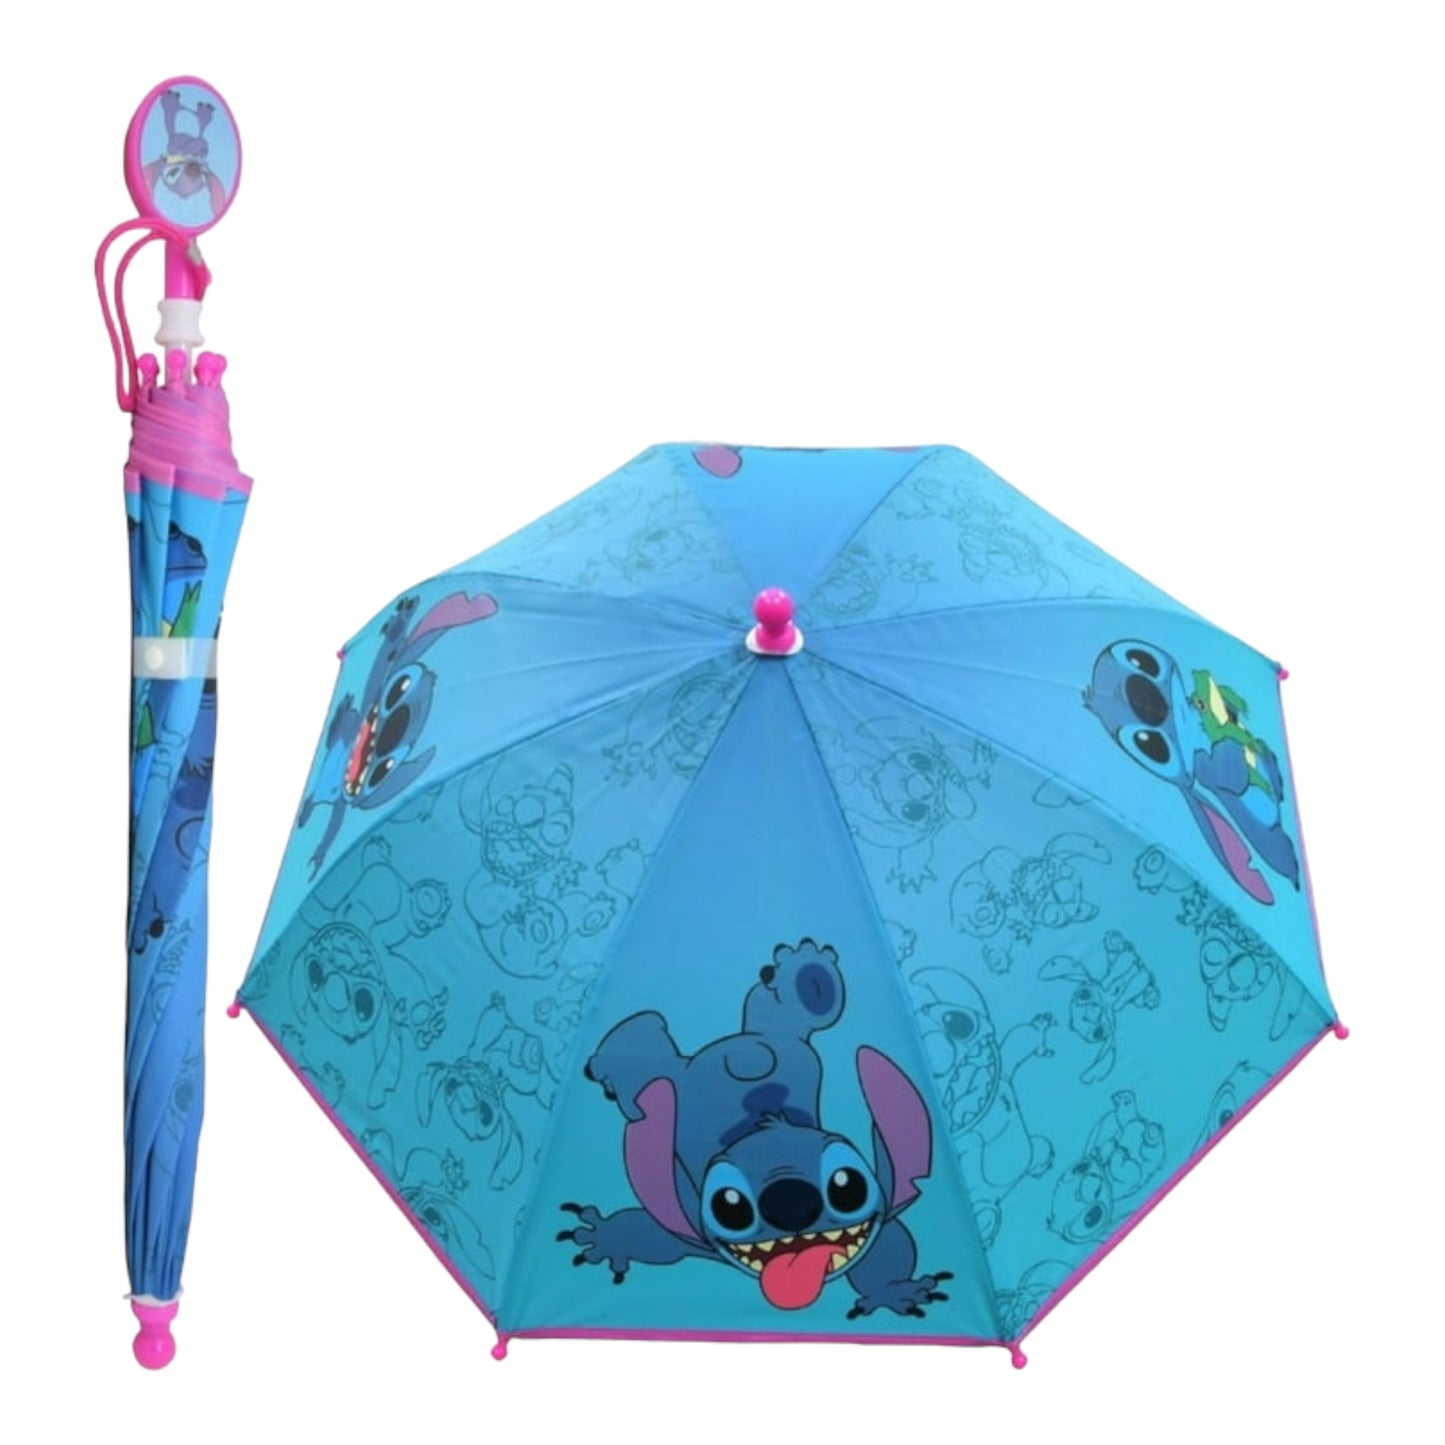 STITCH UMBRELLA WITH CLAMSHELL HANDLE UPDLS339 RB110